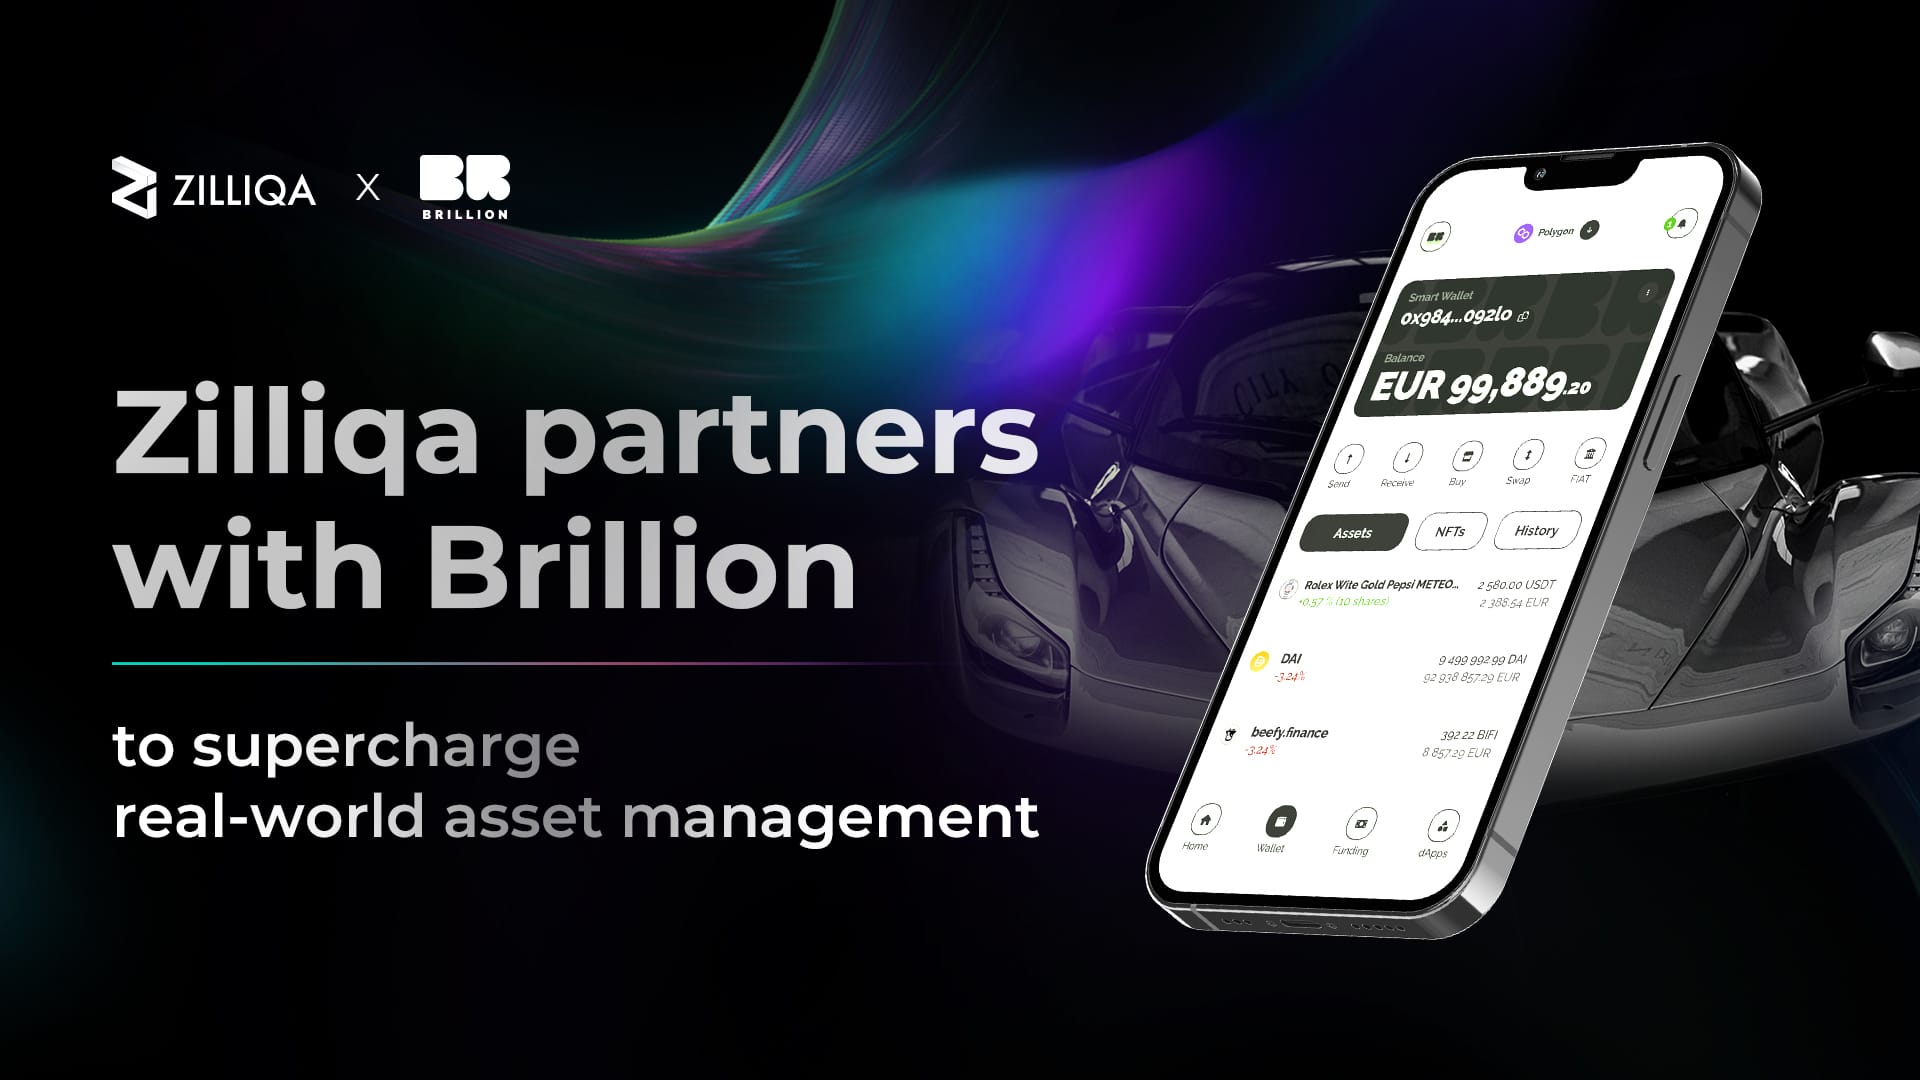 Zilliqa partners with Brillion to supercharge real-world asset management